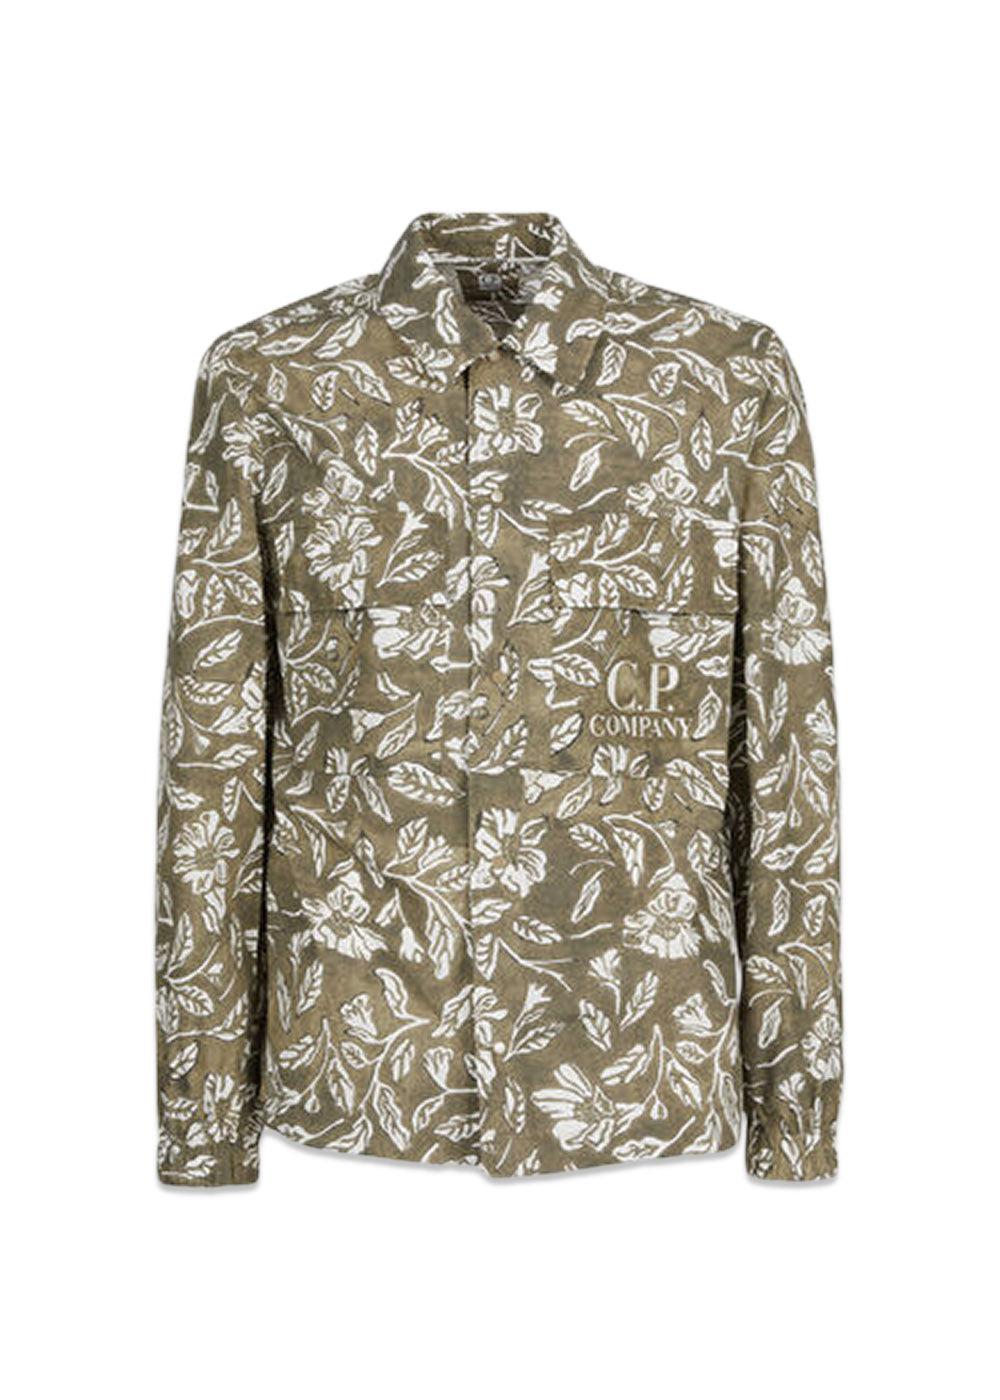 C.P. Companys Shirts - Long Sleeve Popeline Flower Stamp - Lead Grey. Køb shirts her.